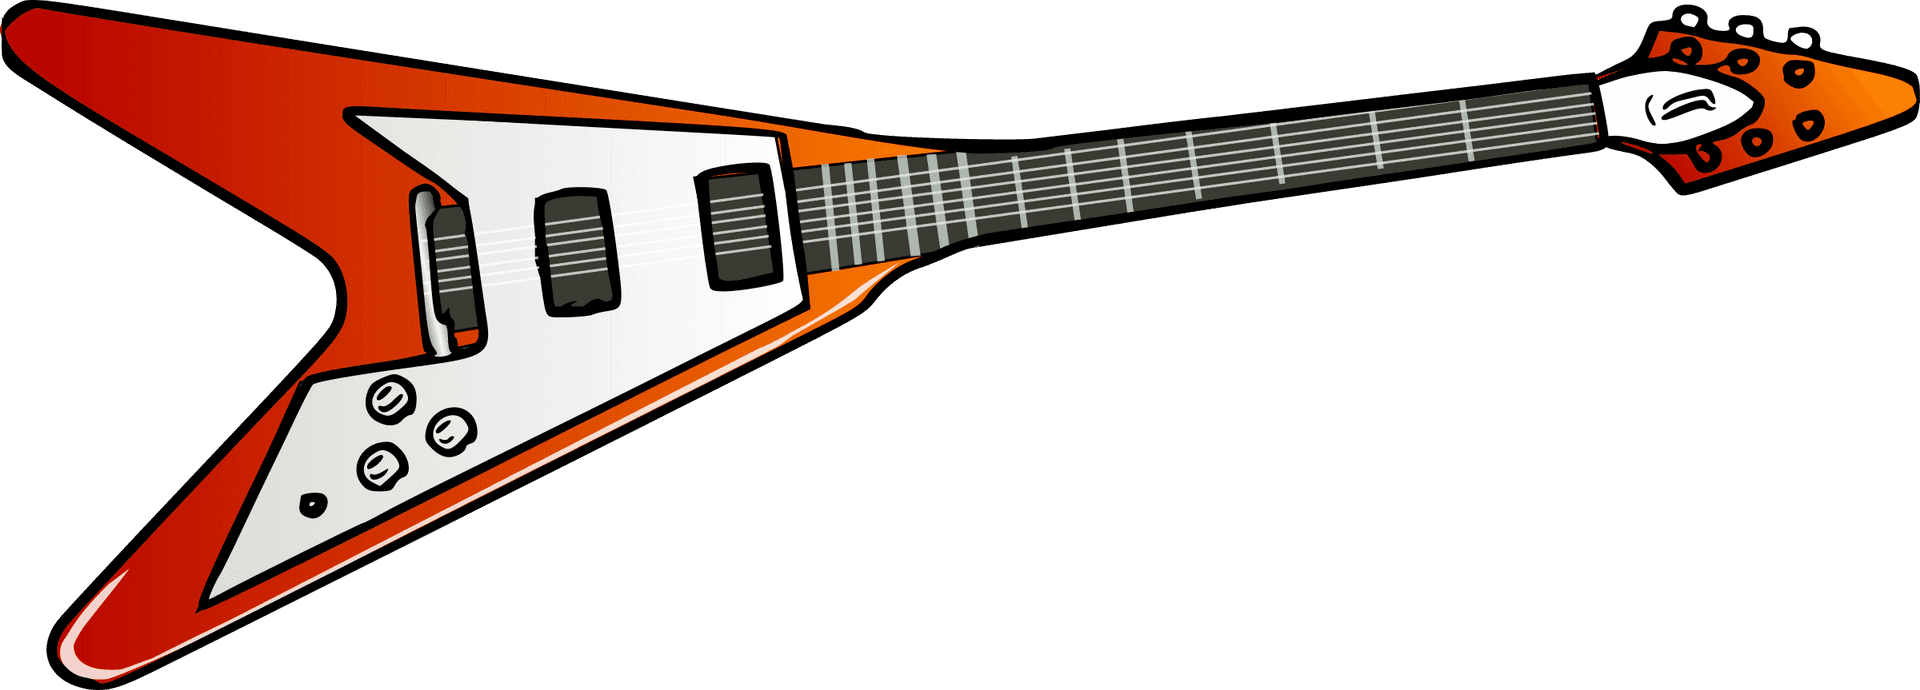 Redand White Electric Guitar PNG